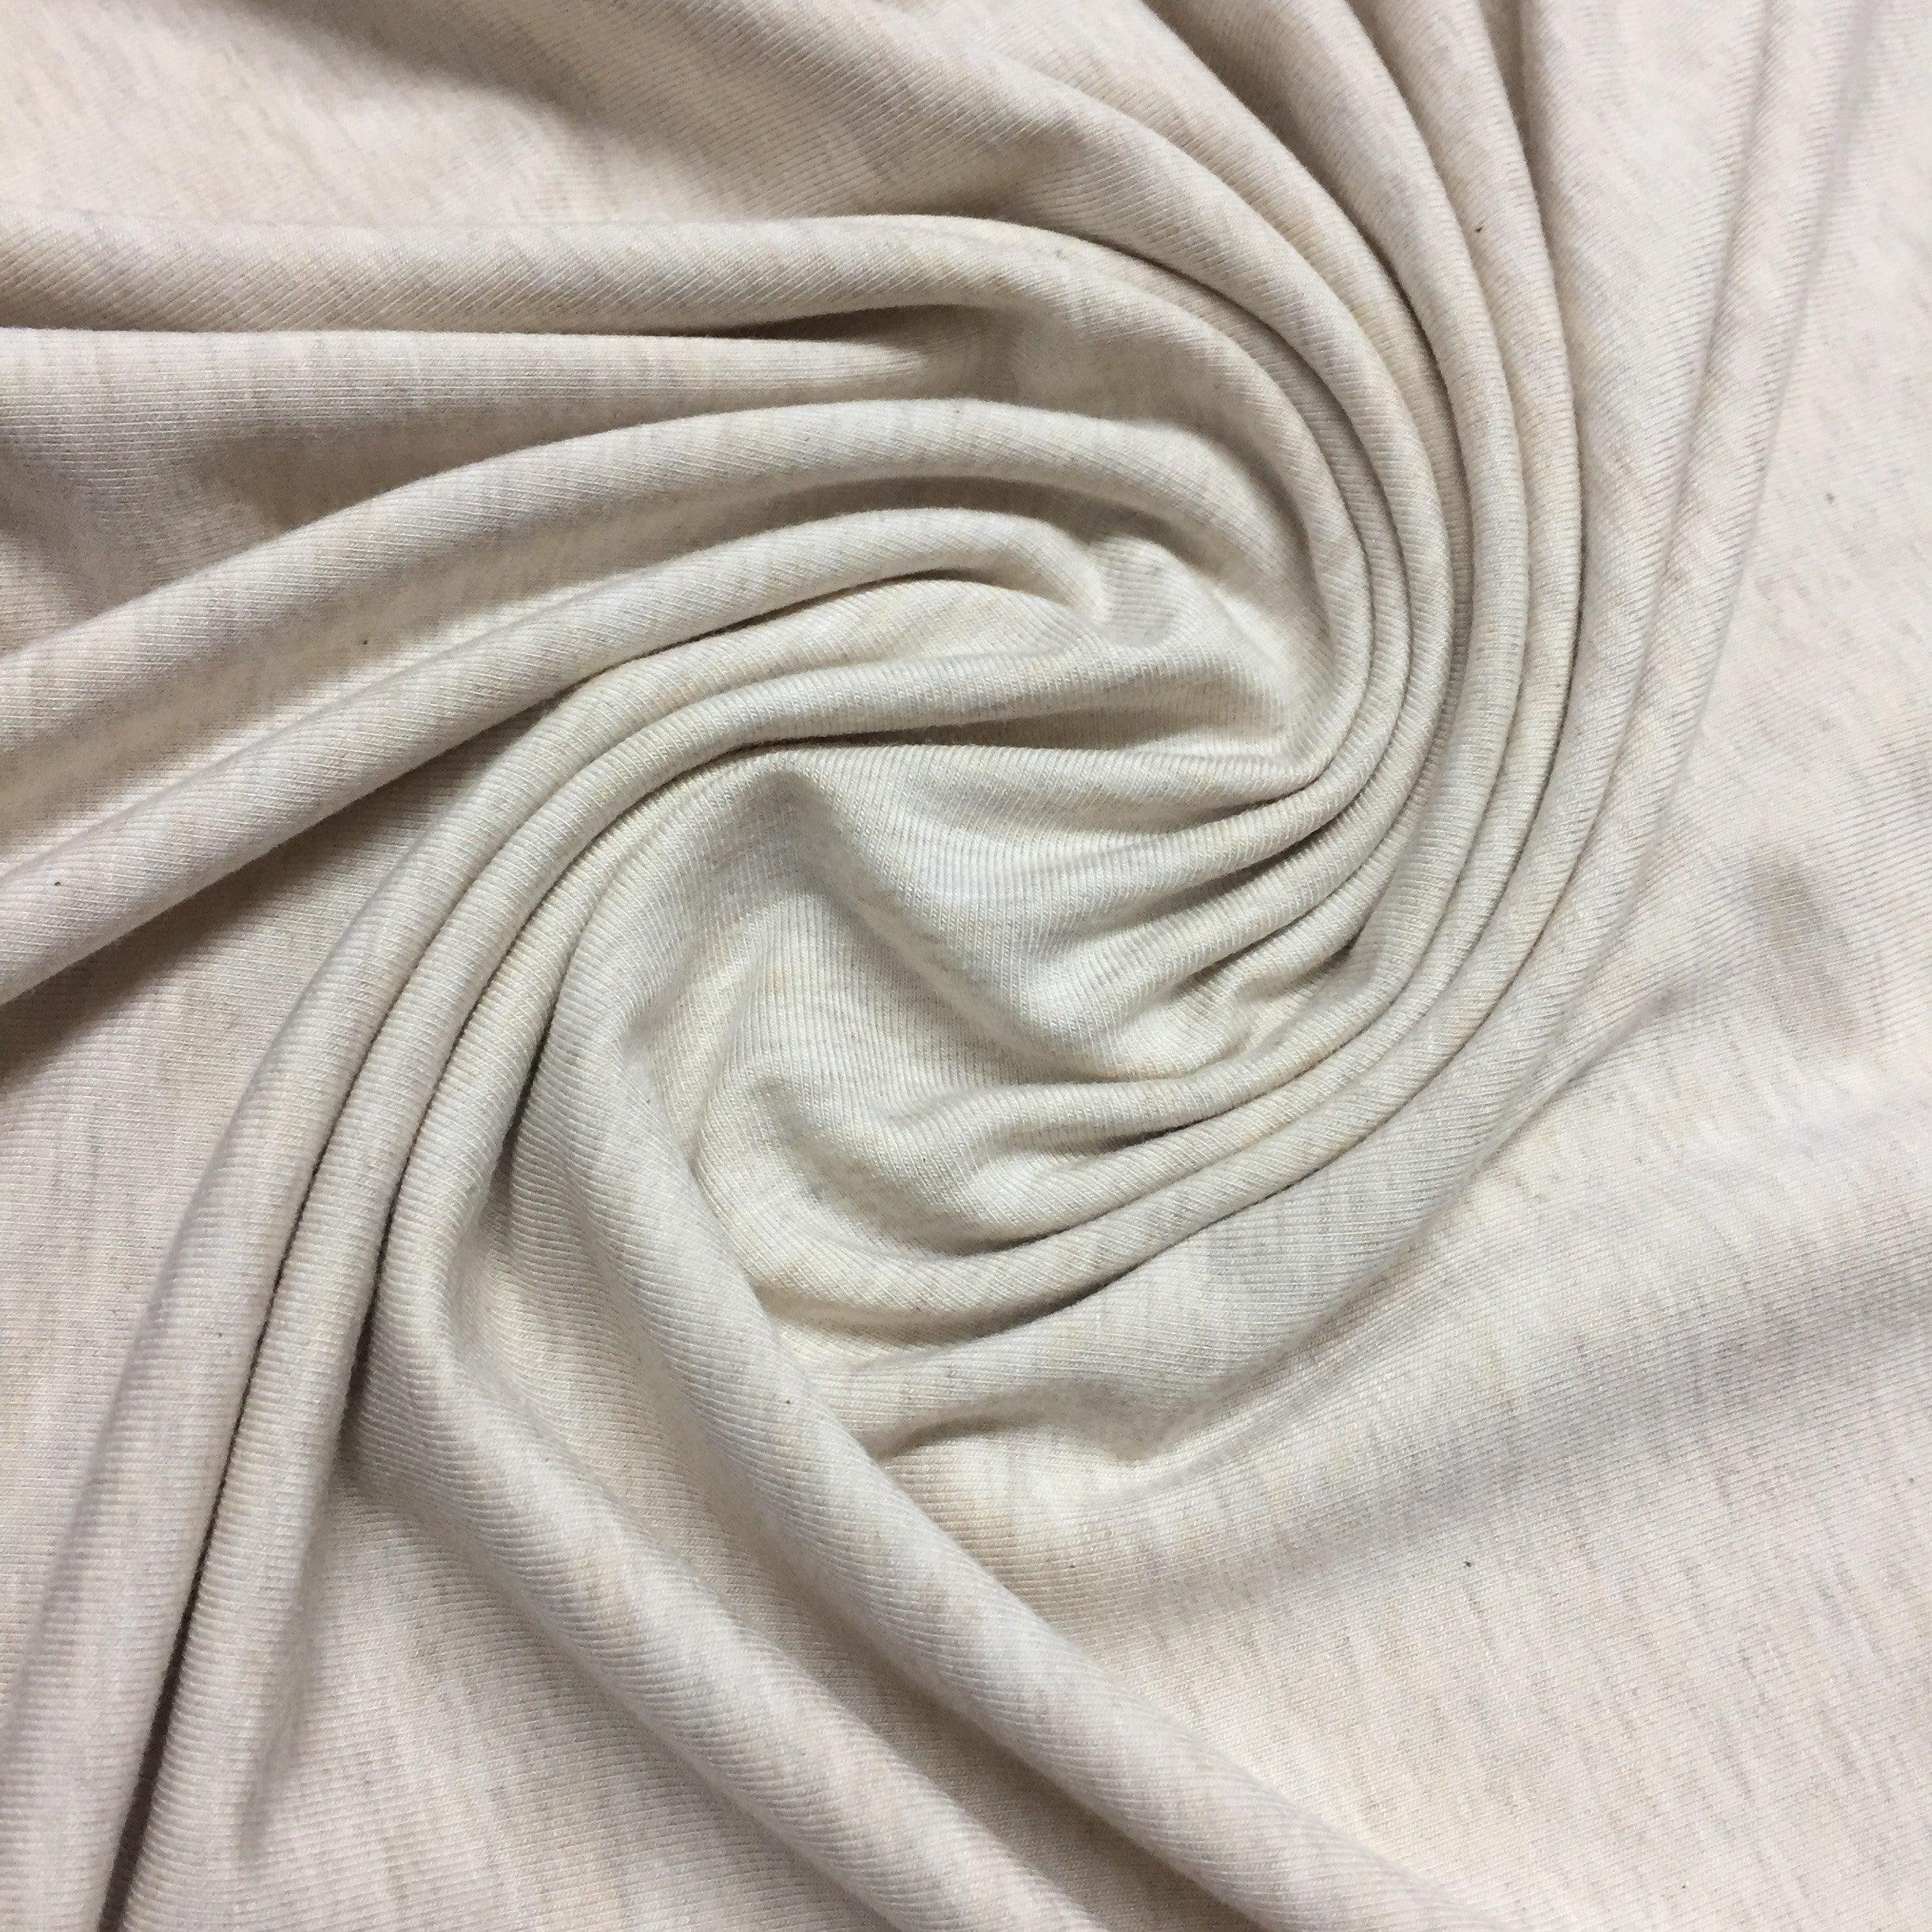 Ribbed Fabric, Shop Fabric Online